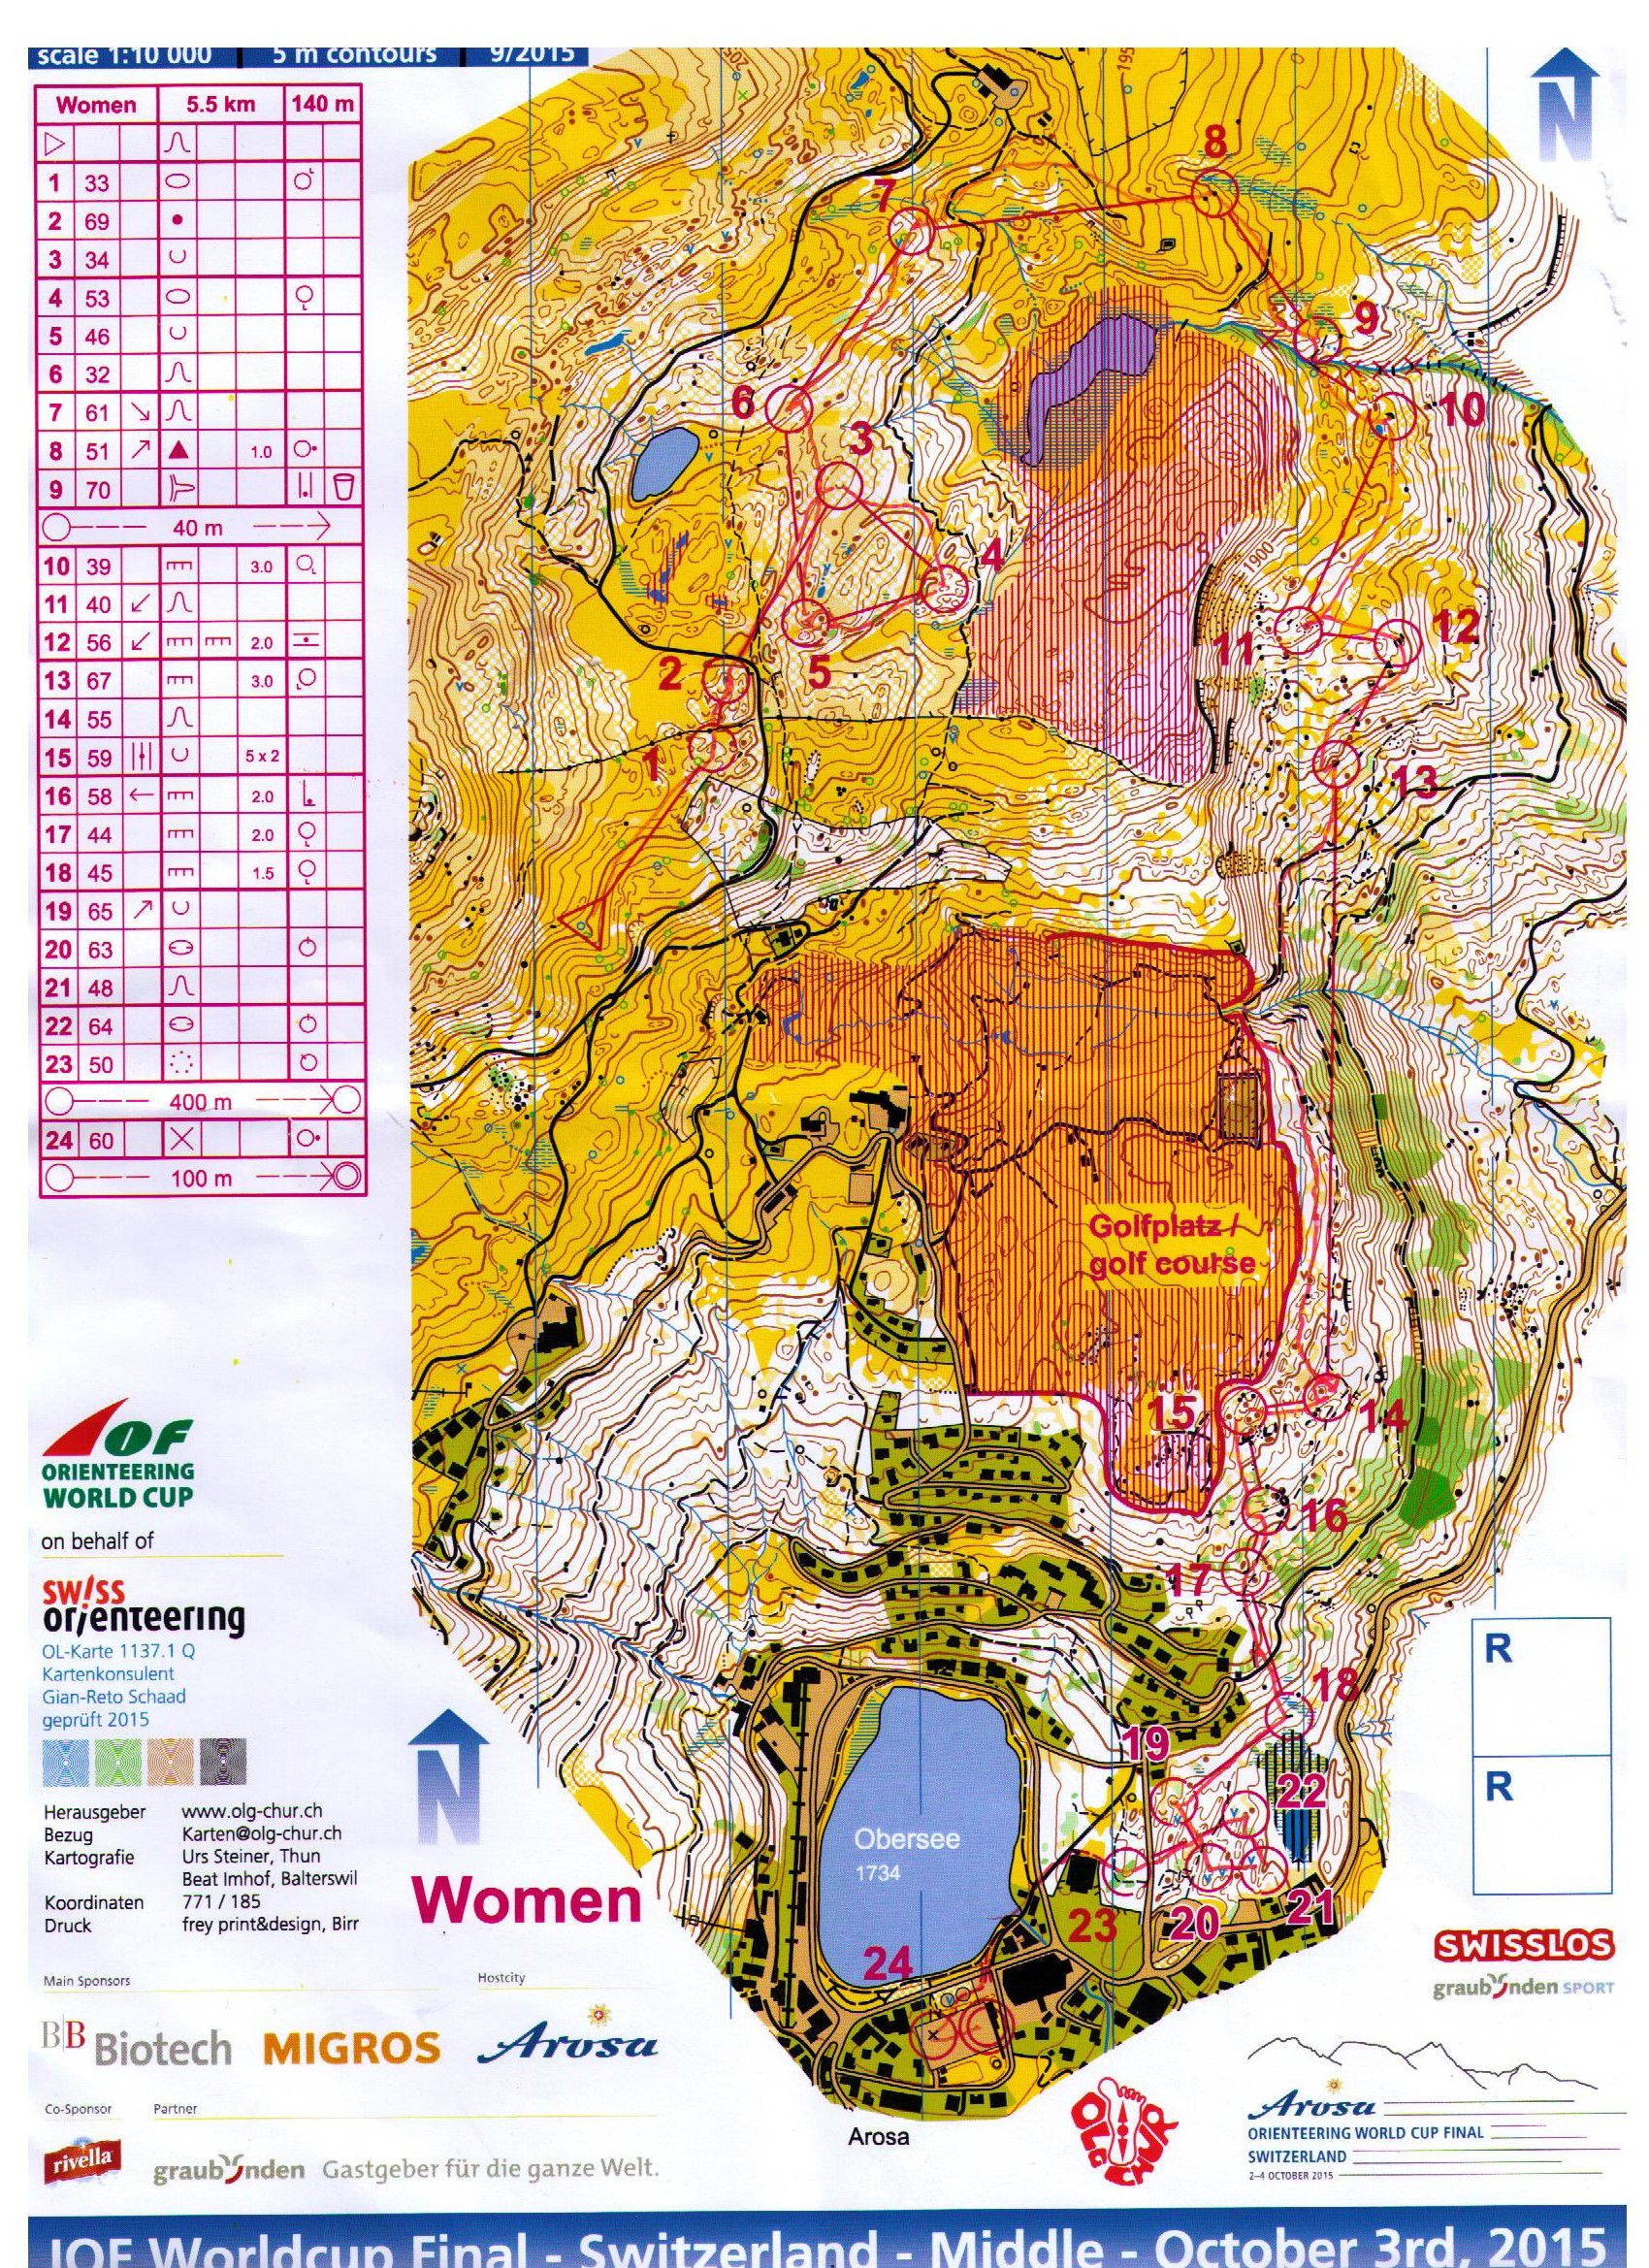 World Cup Arosa - middle (03.10.2015)